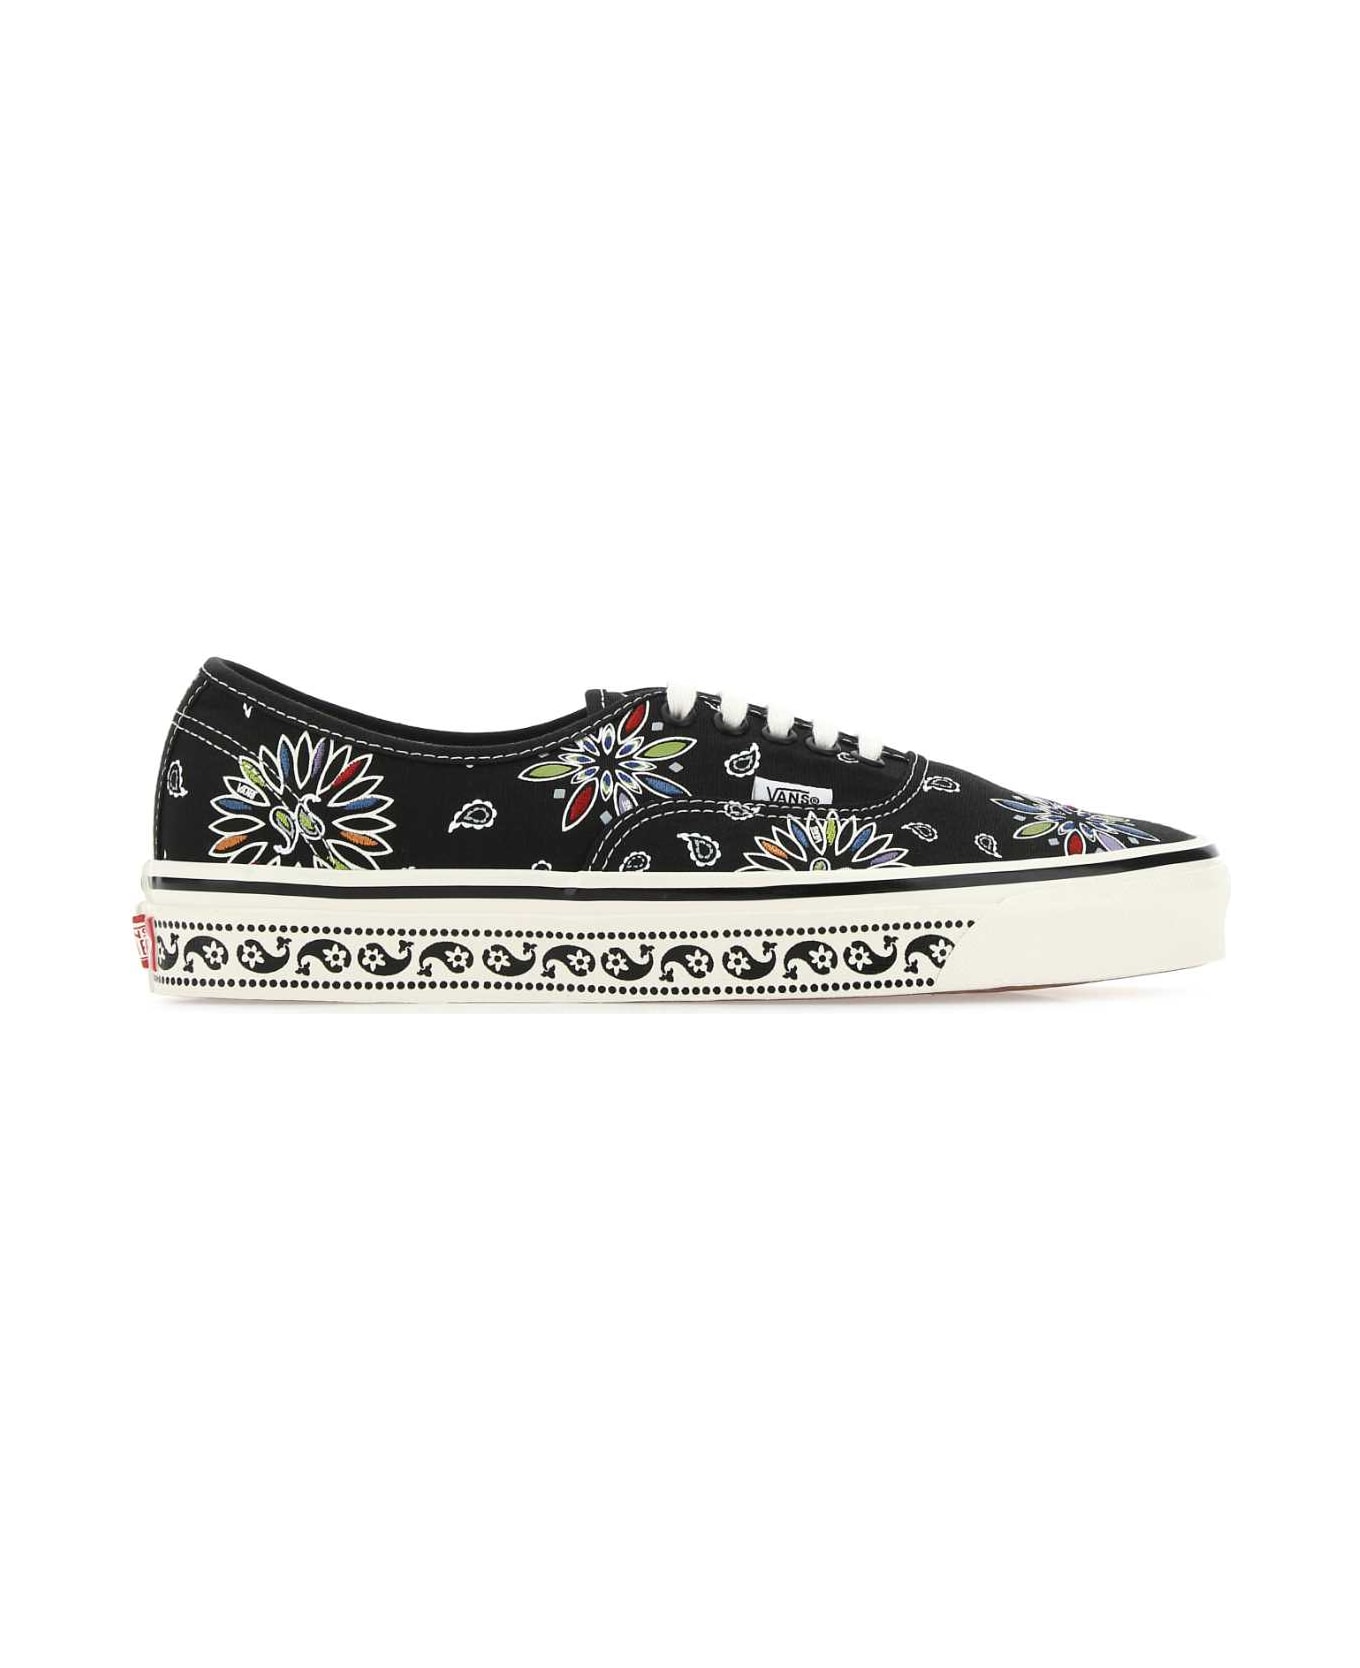 Vans Printed Canvas Anaheim Factory Authentic 44 Sneakers - 9GG1